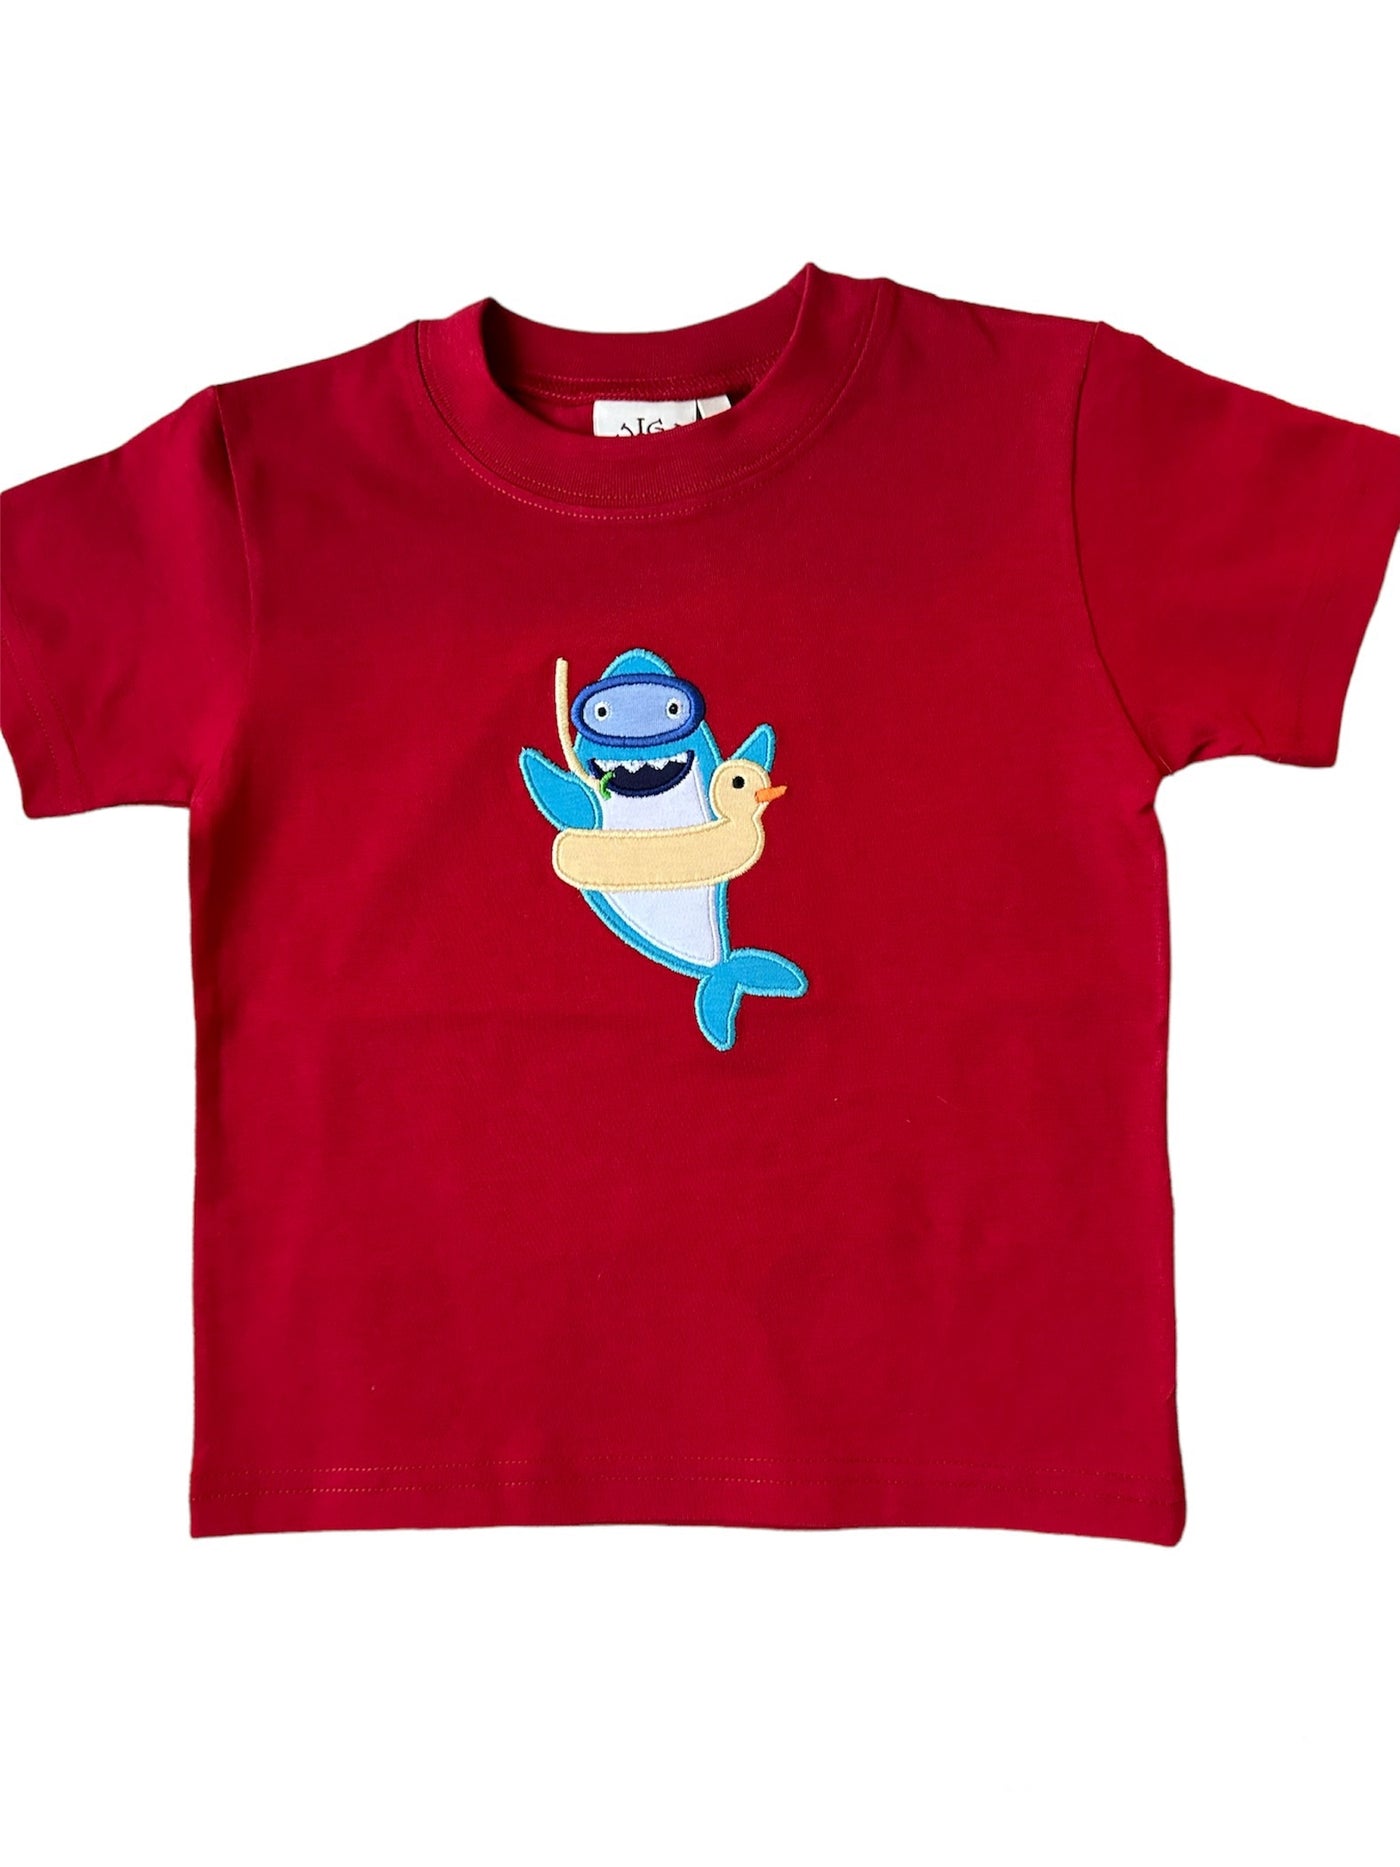 Red Short Sleeve Tee with Snorkling Shark